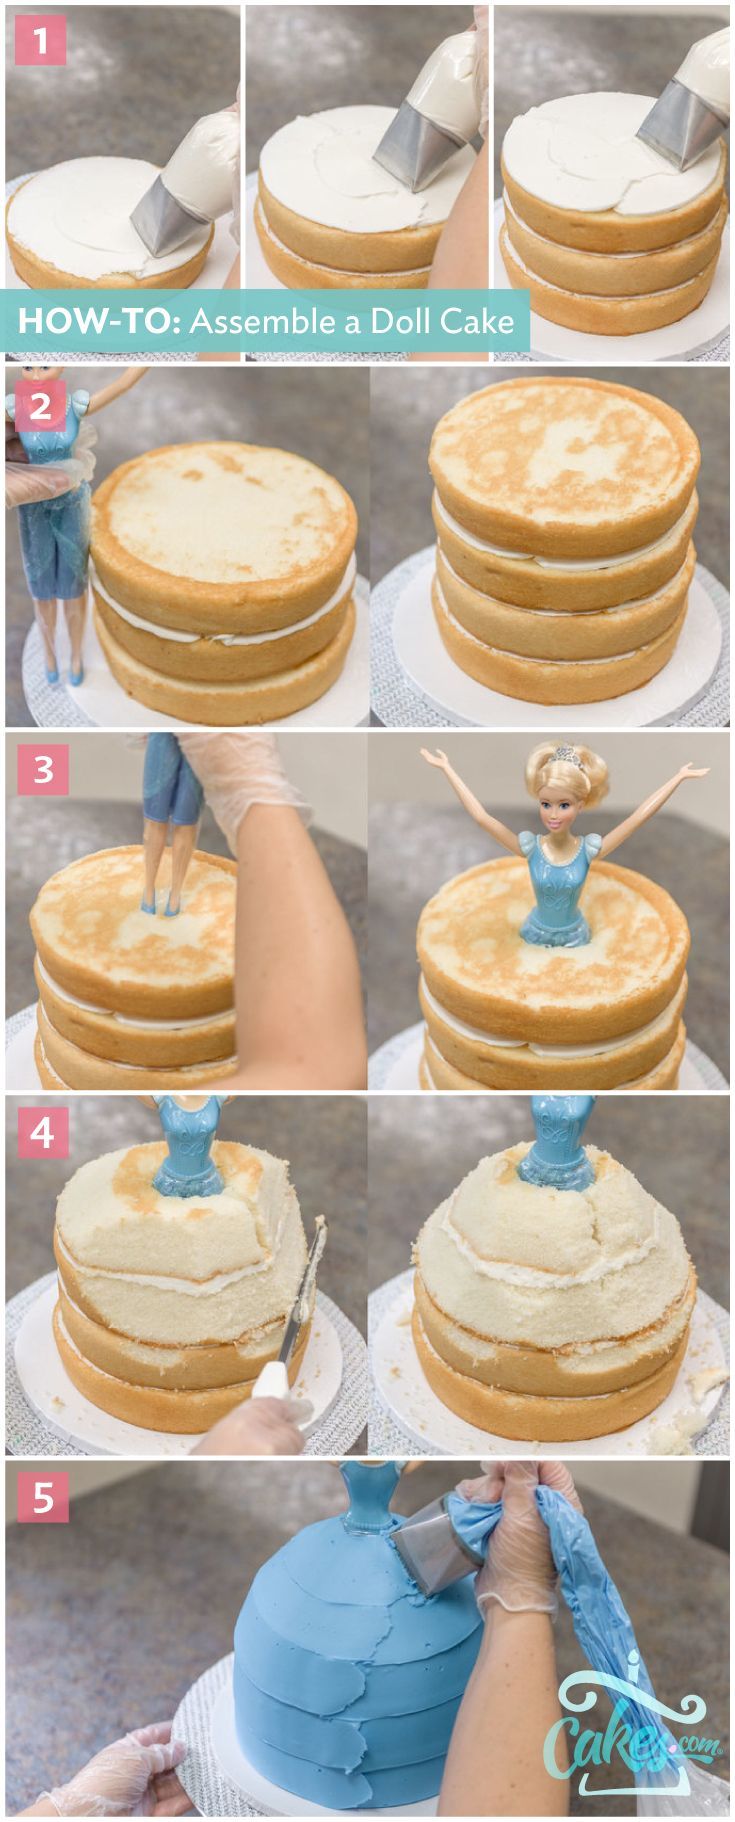 Pro Tip: To make a doll cake, stack cake layers until you reach your doll’s hips and then carve to create the shape of a skirt.